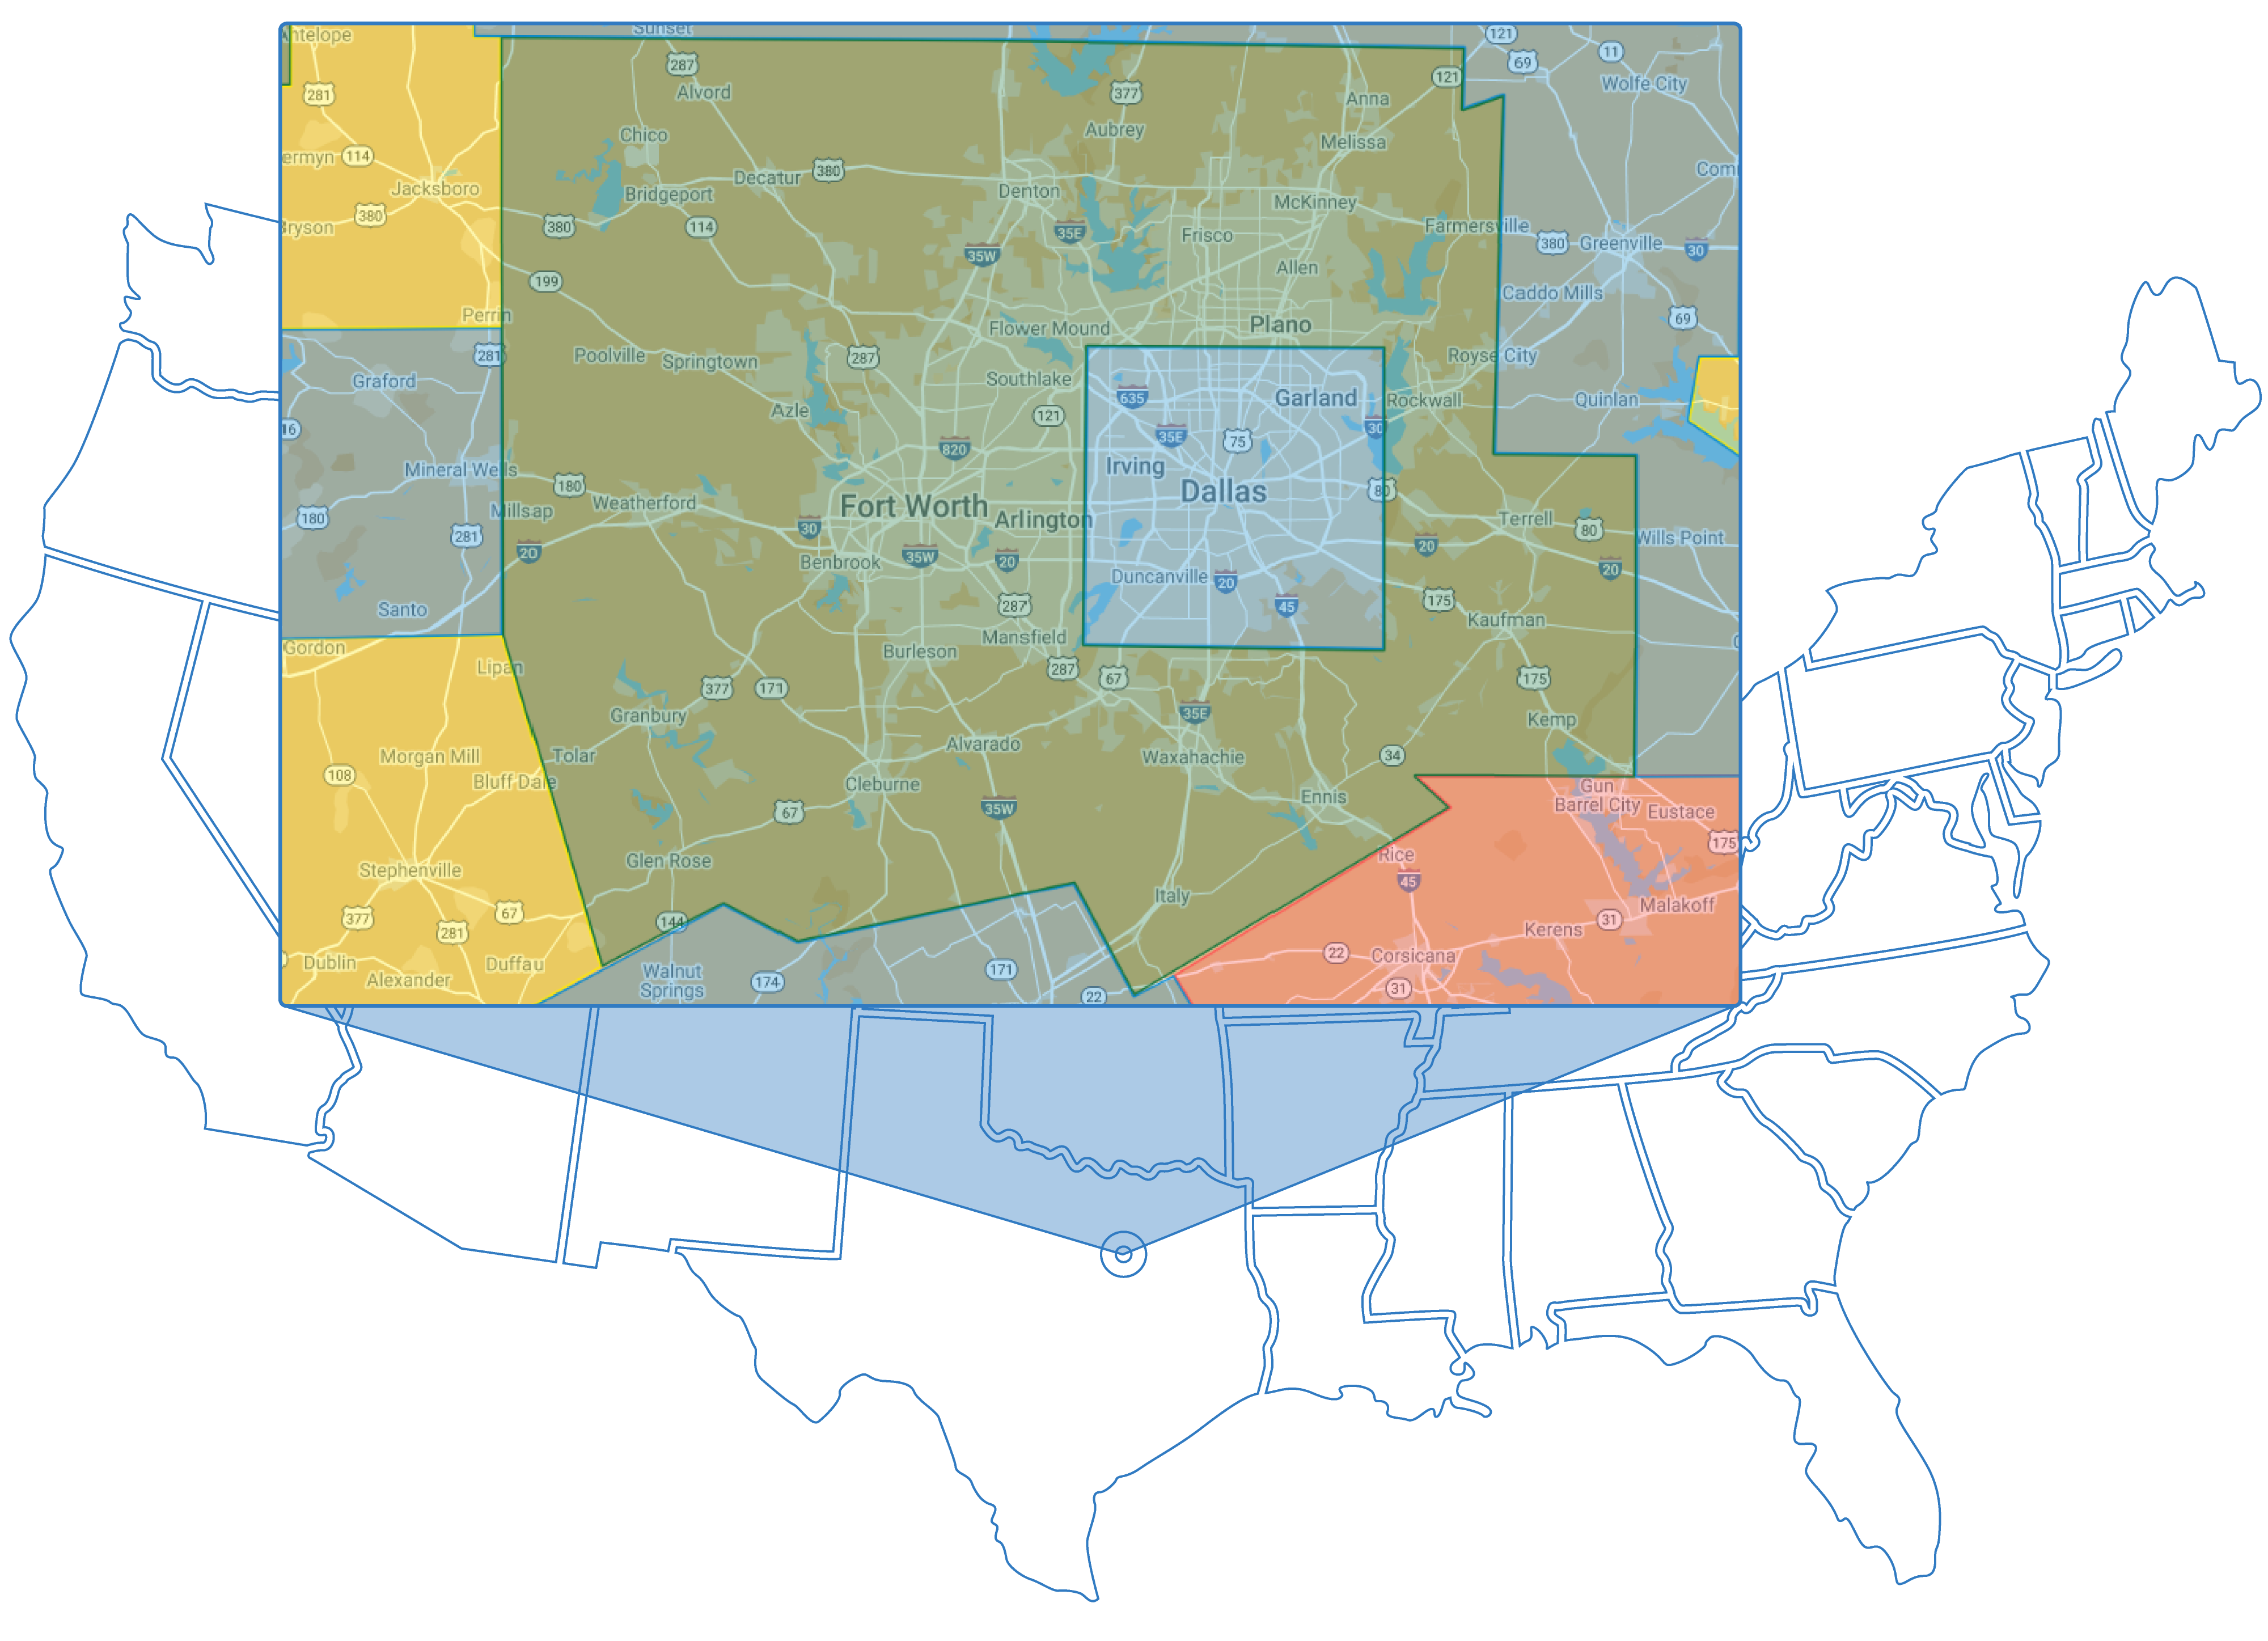 Map of the Greater Dallas-Ft. Worth area, color coded by household income levels. Data Source: Google Maps, U.S. Census, Bureau of Labor Statistics.